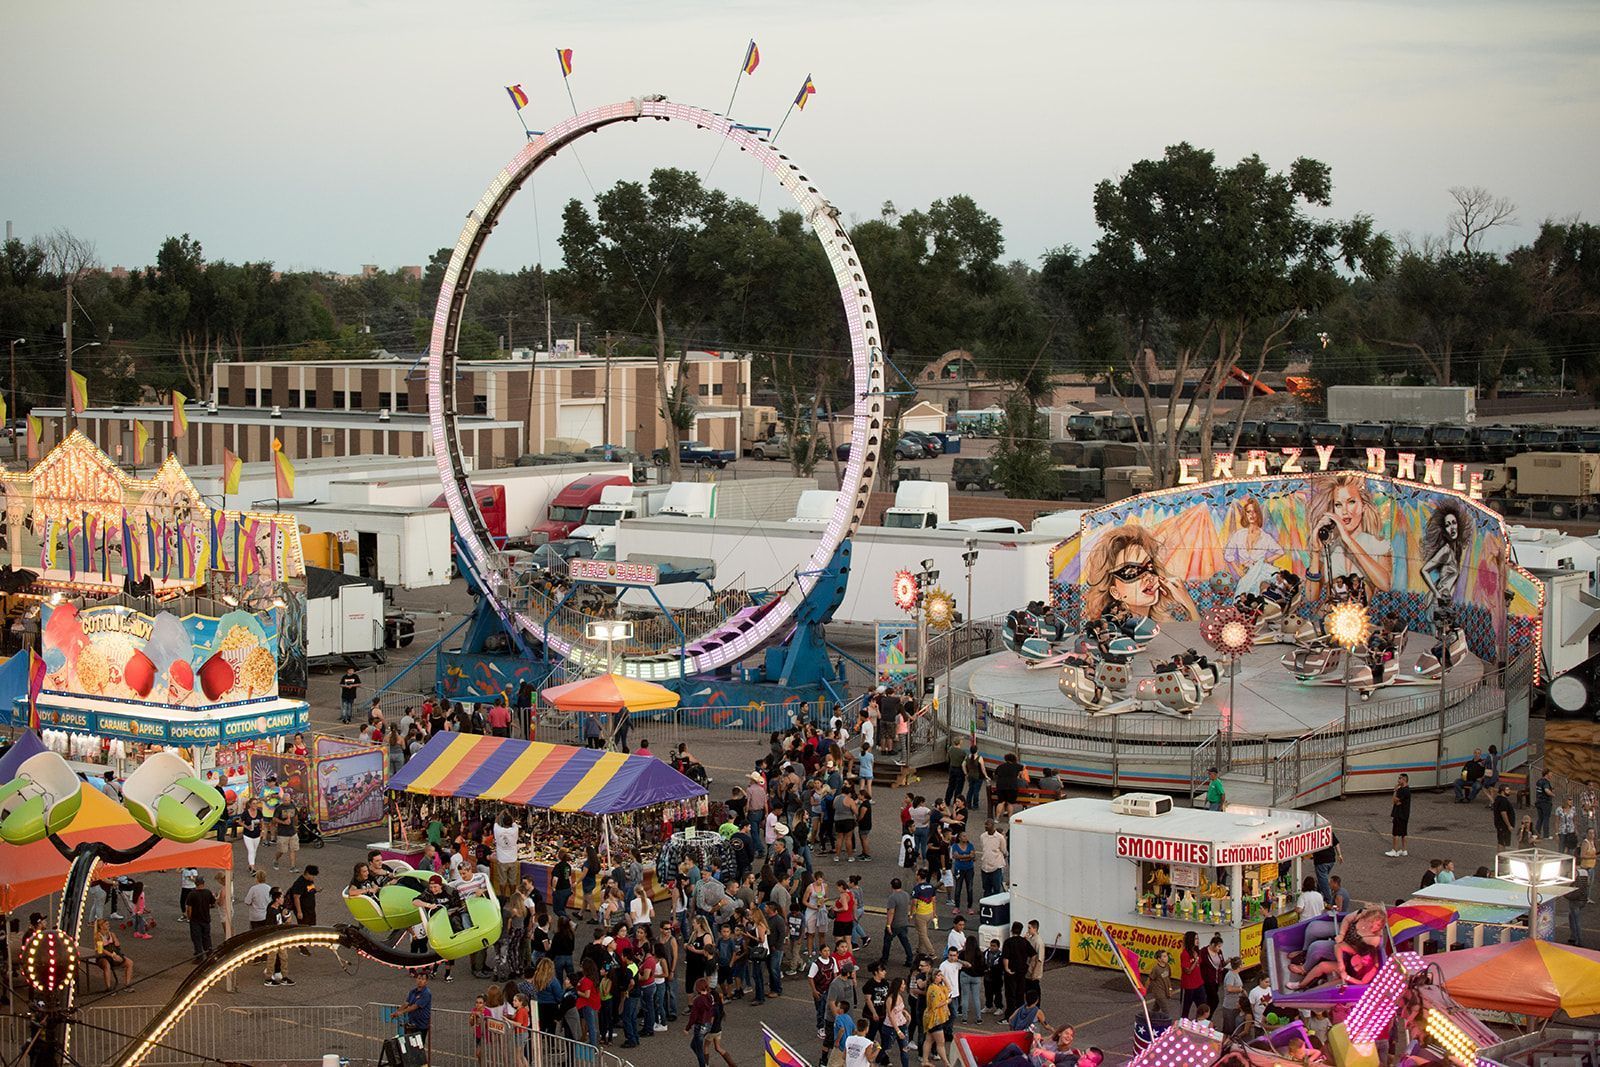 view of the Carnival Rides at the Colorado State Fair rides from up high